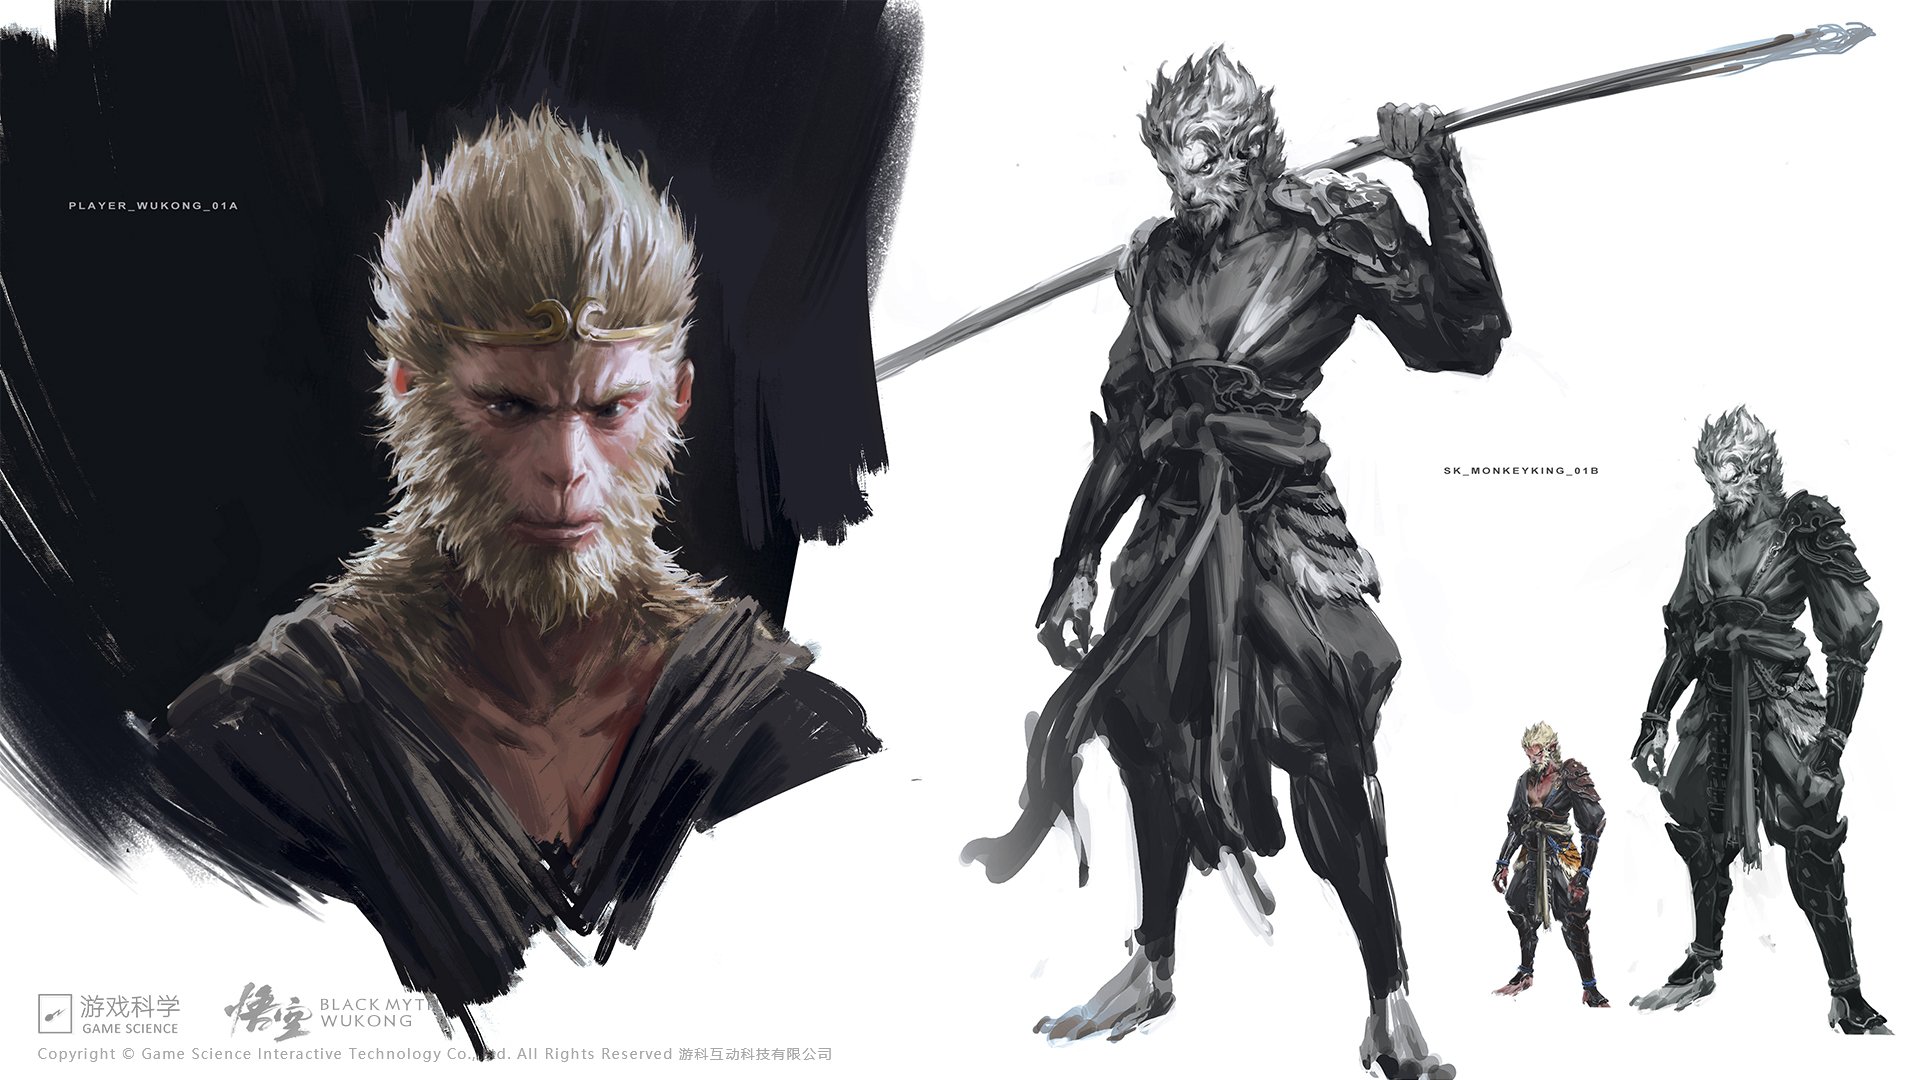 Artwork from Black Myth: Wukong showing exclusive digital deluxe edition content